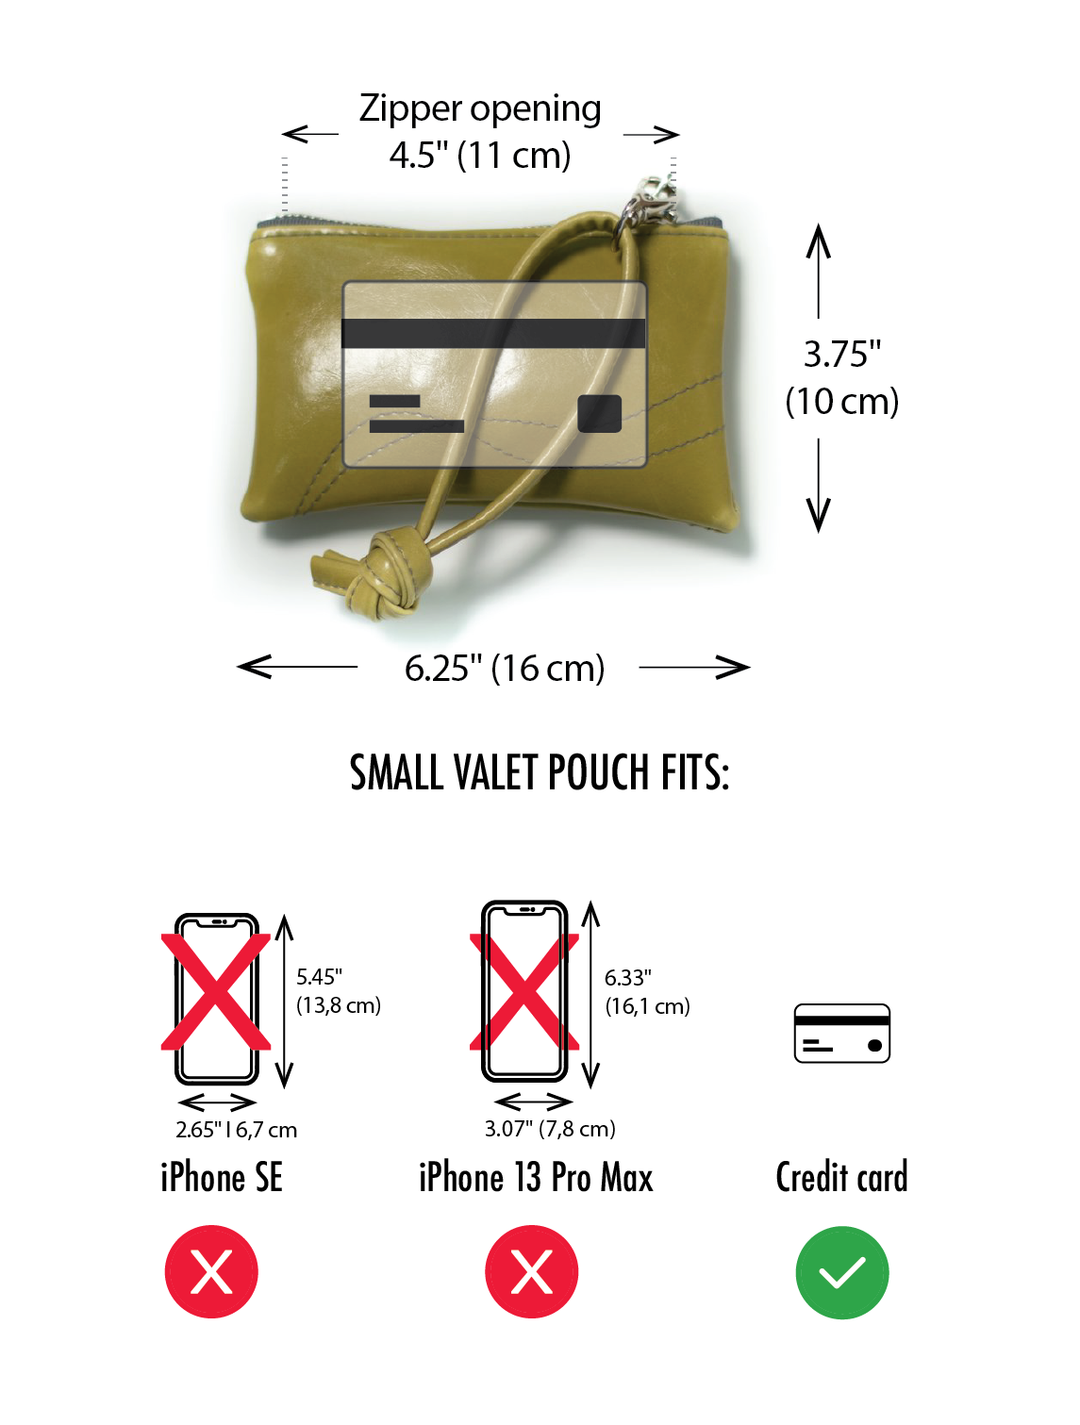 Small Valet Pouch measurements